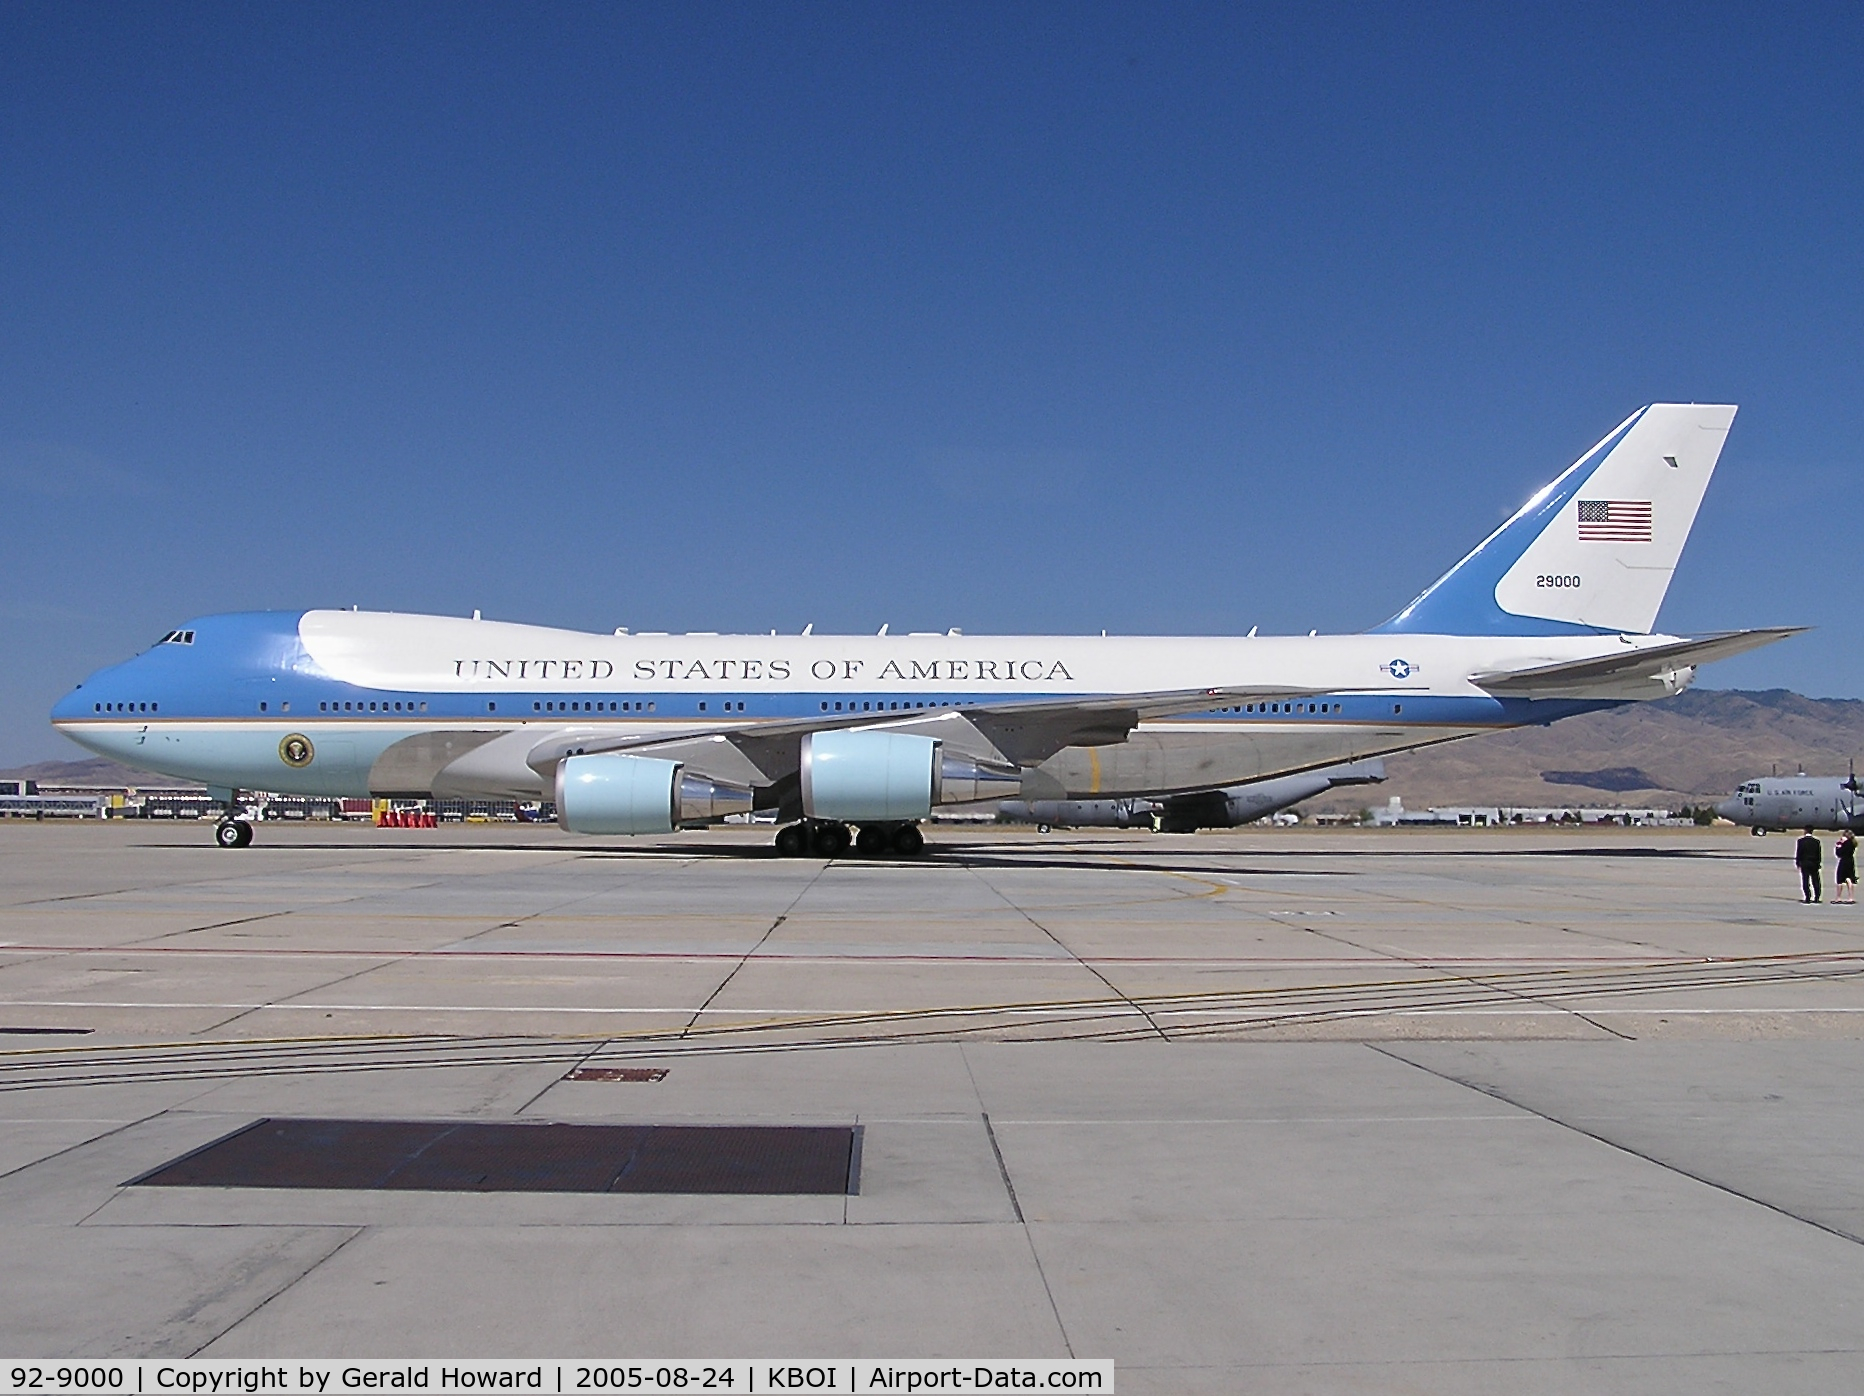 92-9000, 1987 Boeing VC-25A (747-2G4B) C/N 23825, Parked on National Guard ramp during brief visit.